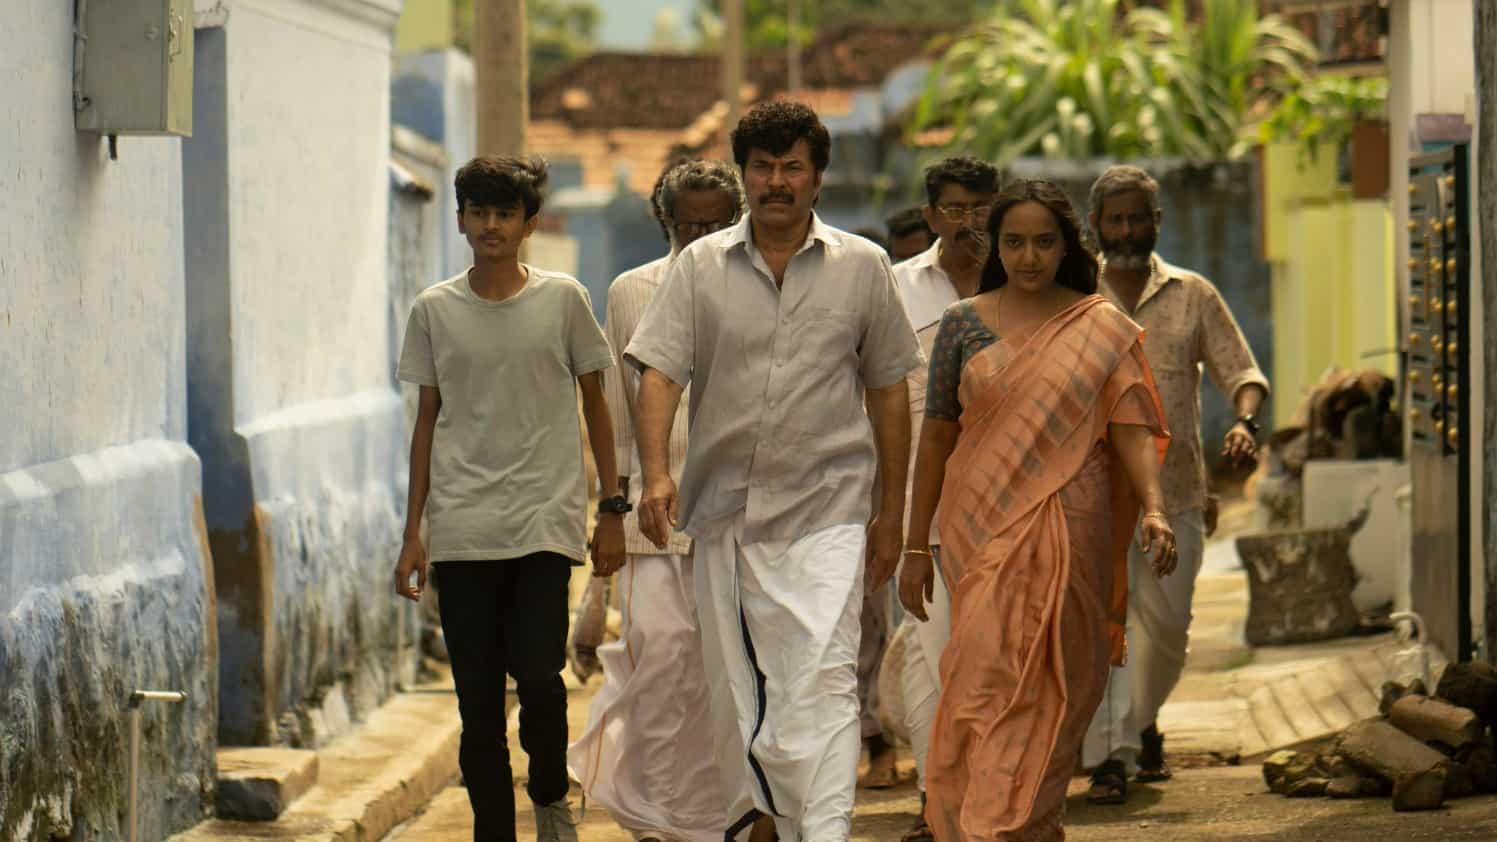 Mammootty’s Nanpkal Nerathu Mayakkam gears up to hit theatres, release